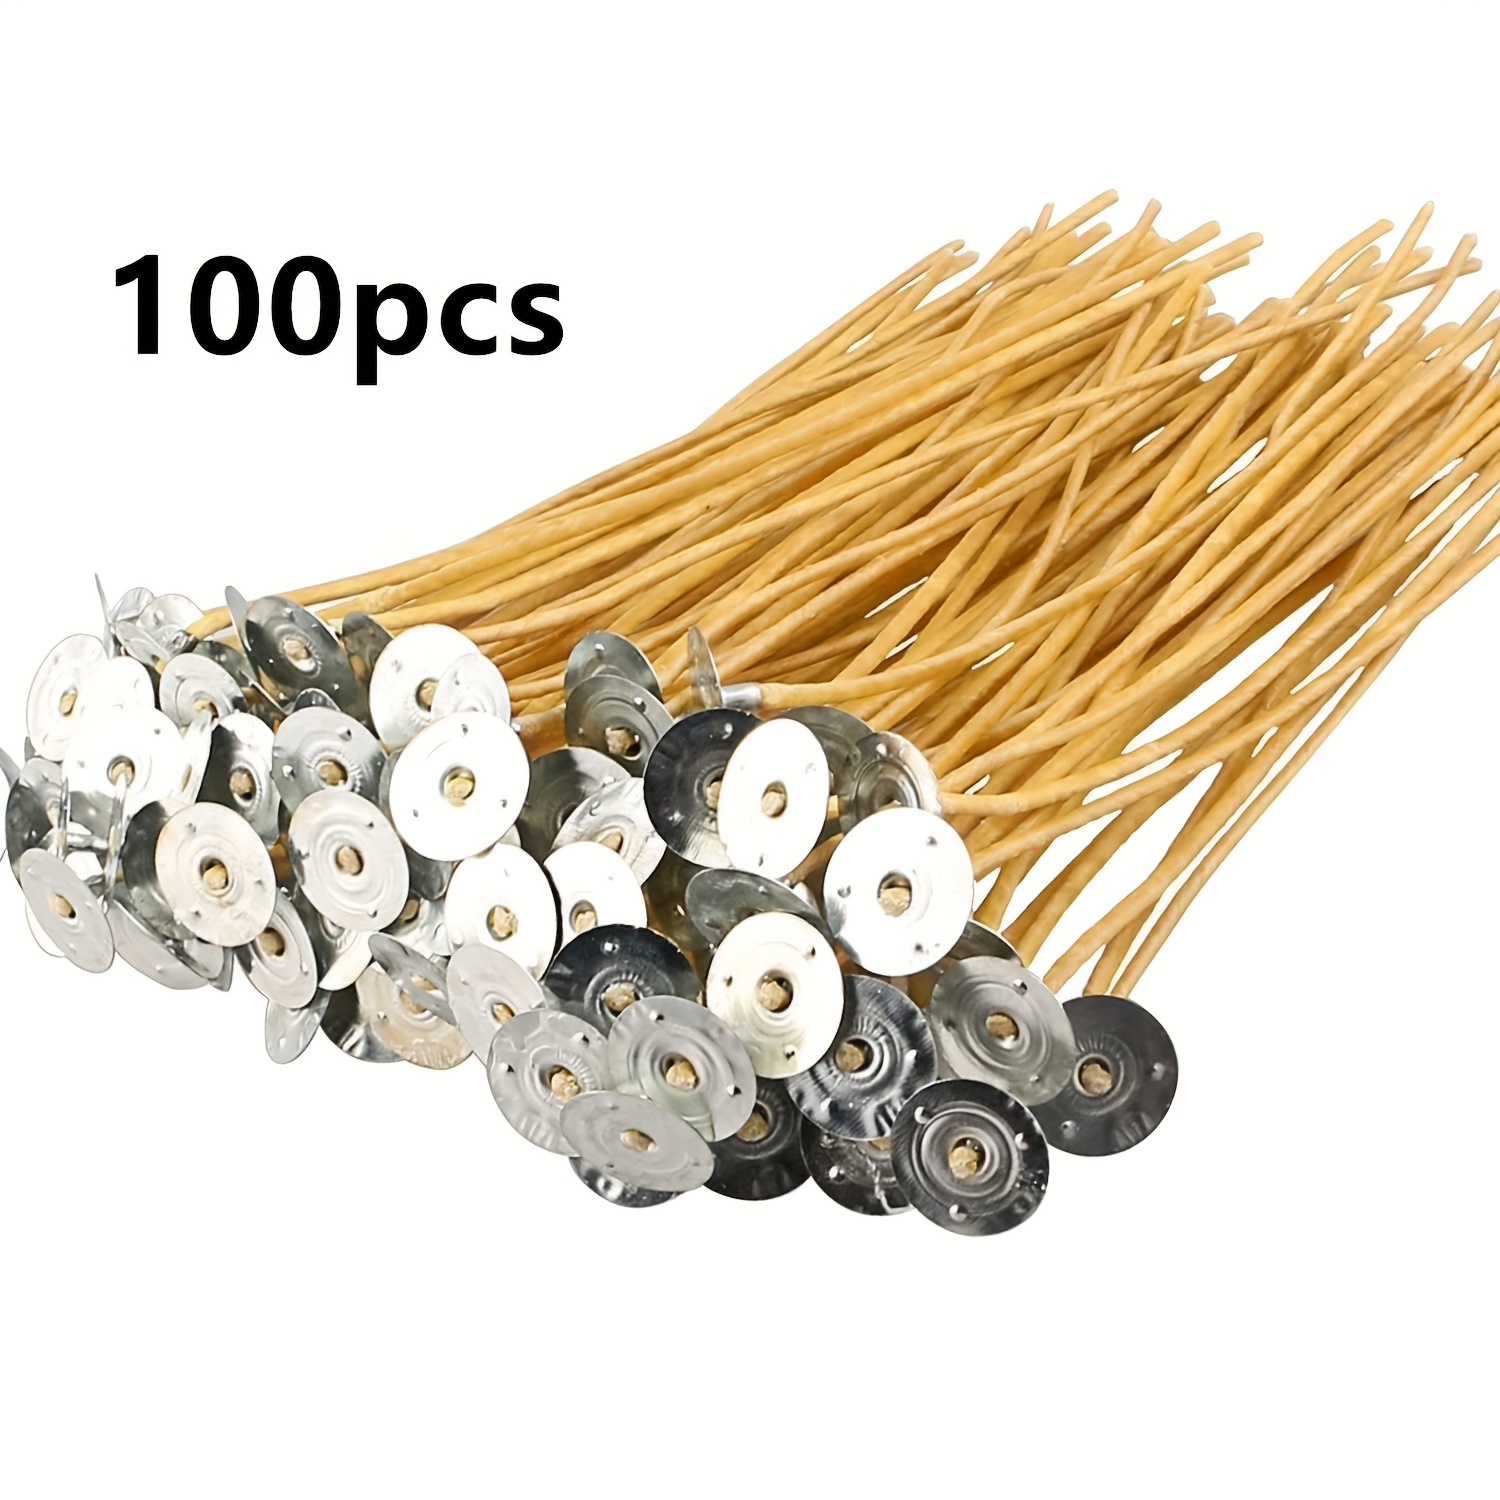 500 Pcs Candle Wicks, 6 in Pre-Waxed for Candlemaking, Long Cotton Core  Wick for Soy Wax with Metal Base - Candle DIY